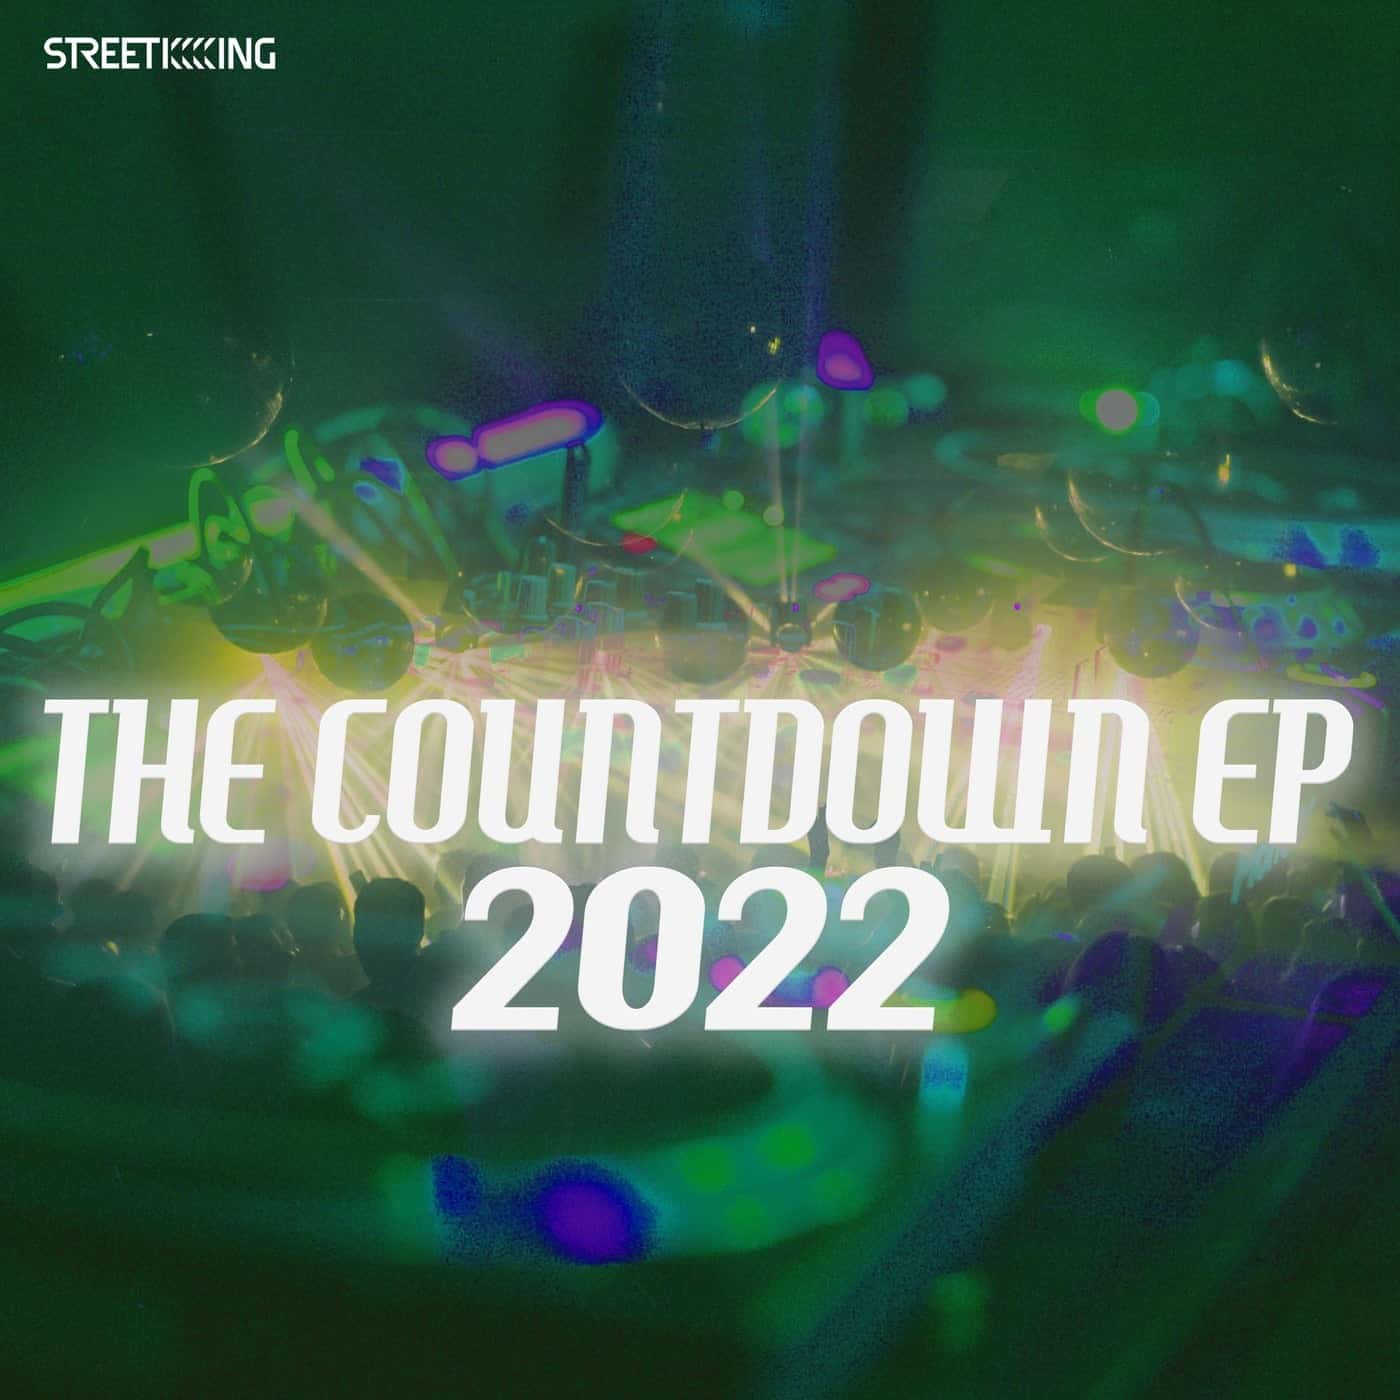 image cover: Quelupa, Boswell The Menace, Andy Bach, Augend & Addend, Marco Ridulfo, Holly Rae - Street King Presents The Countdown EP 2 / SK627